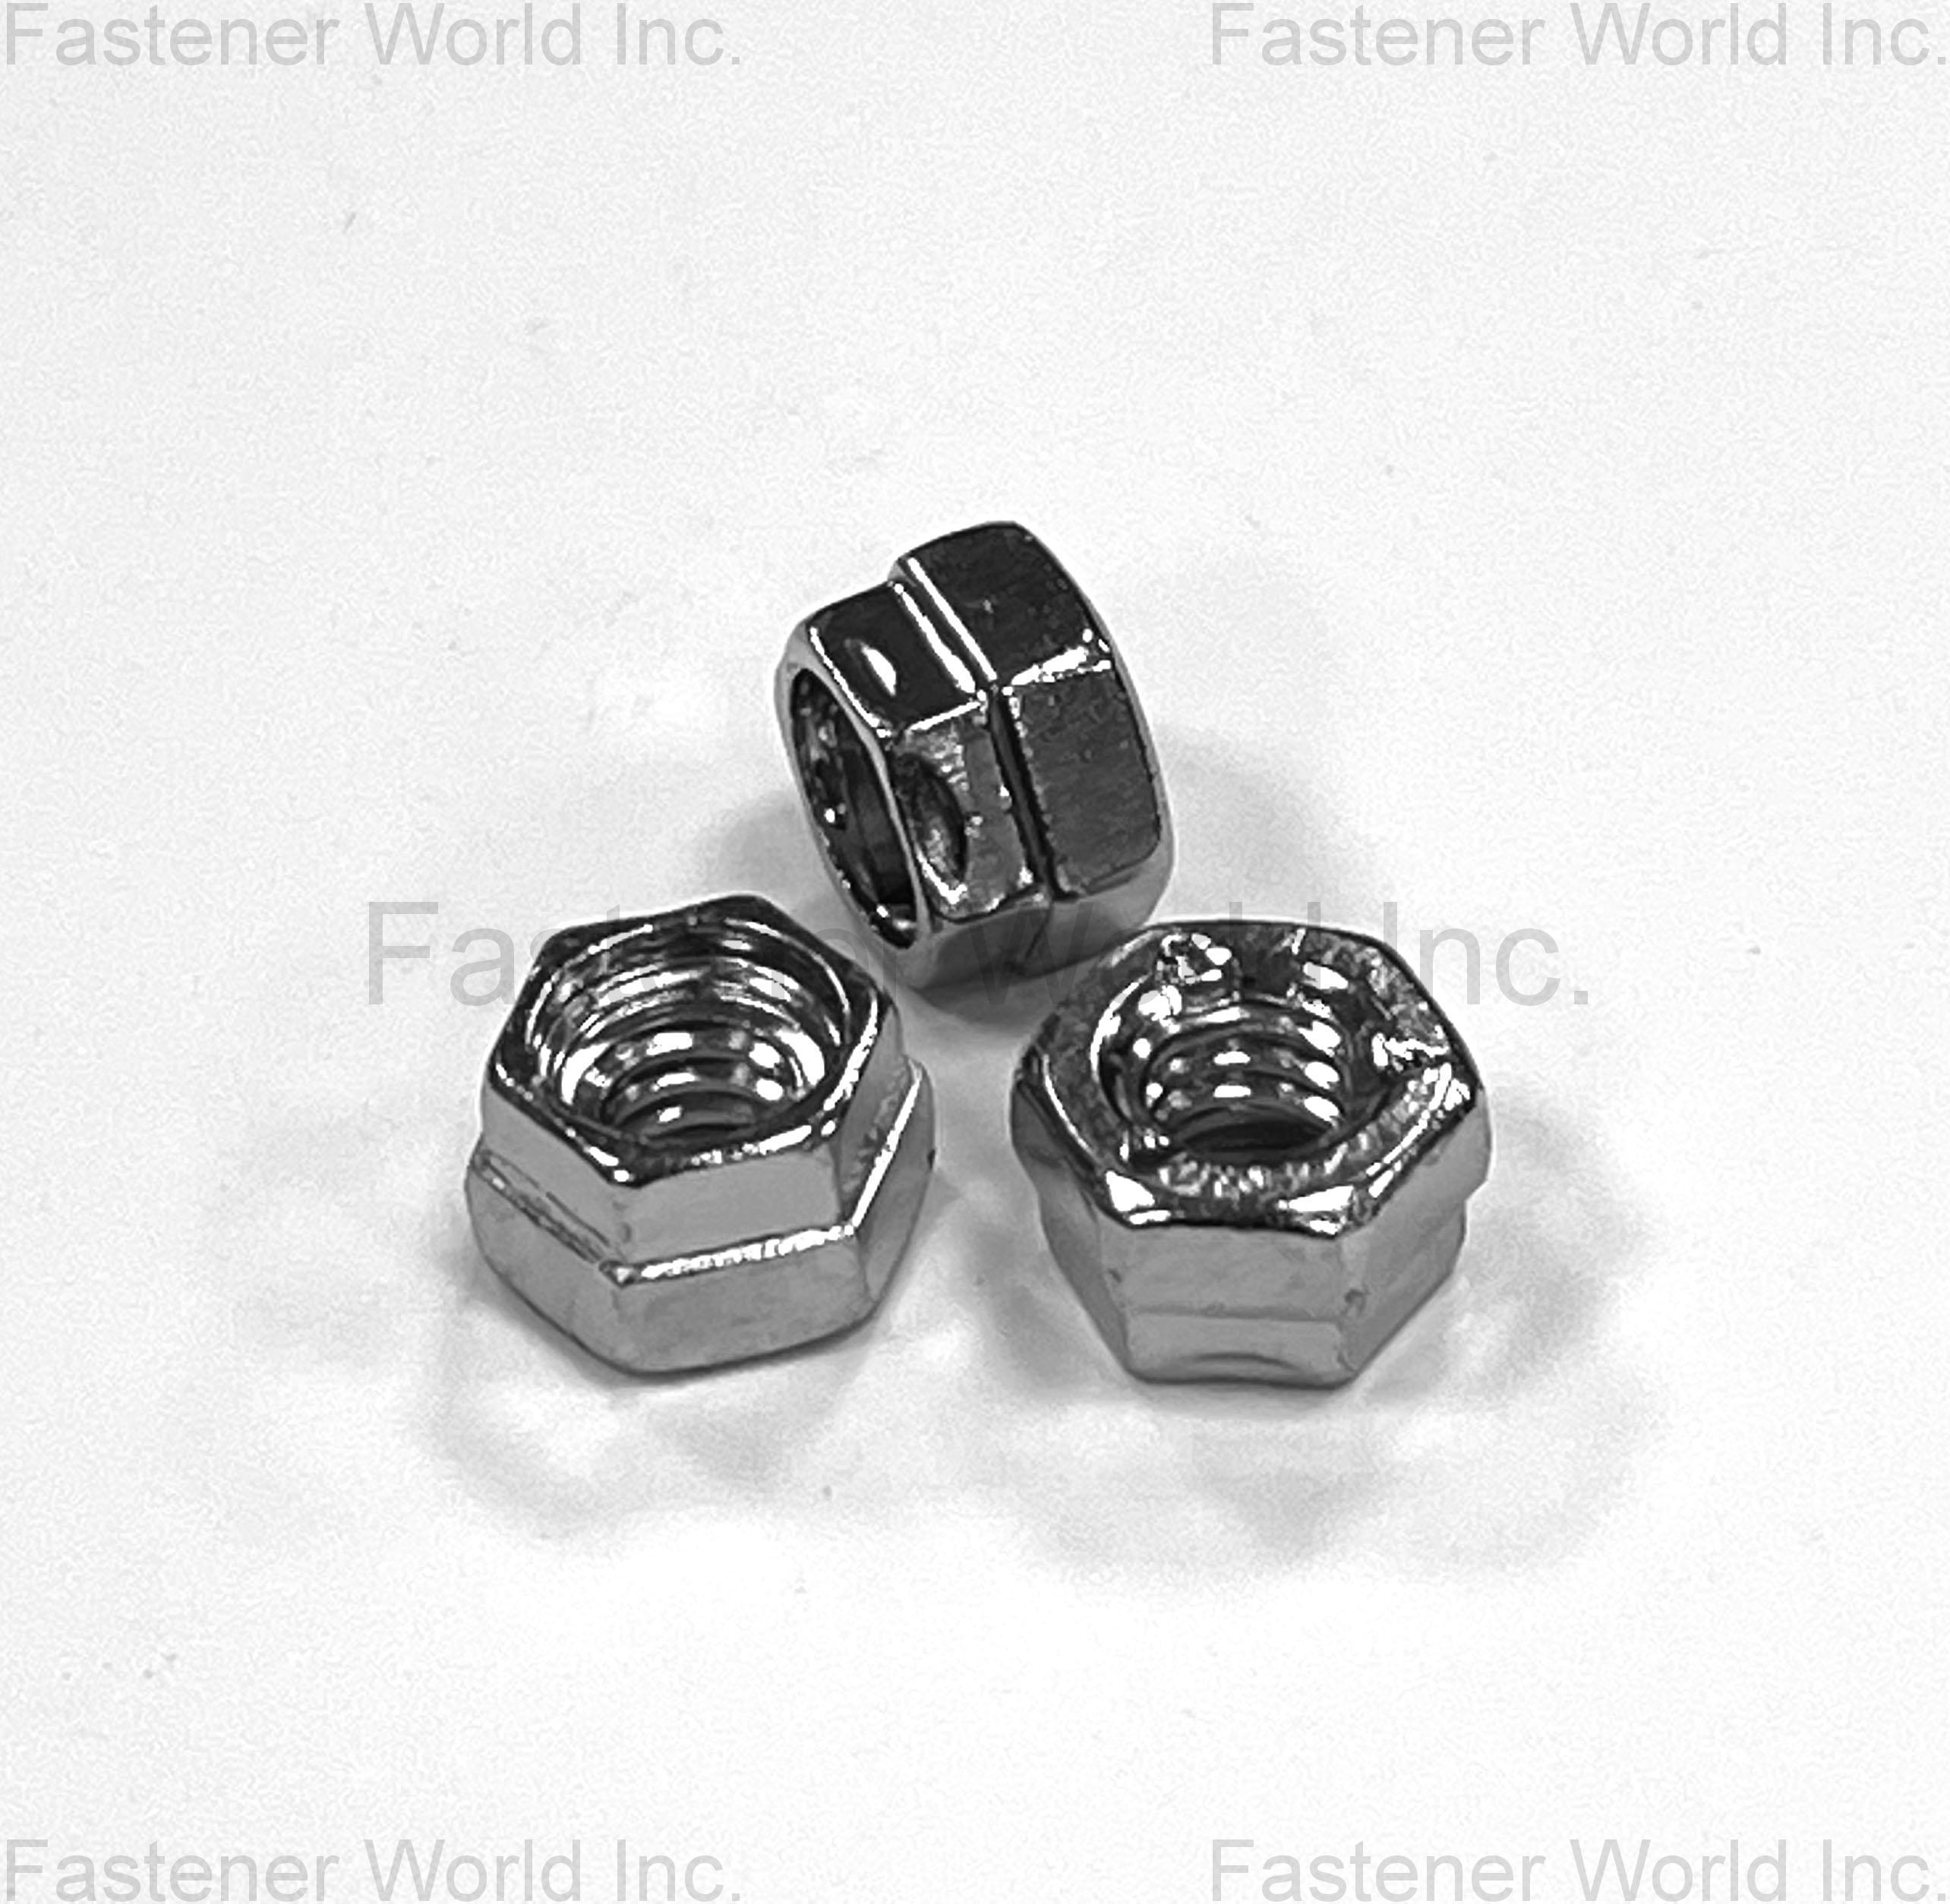 Tina Fastener Co., Ltd. , Double Lock Nuts (with 3 notches) 雙層帽(壓三點)